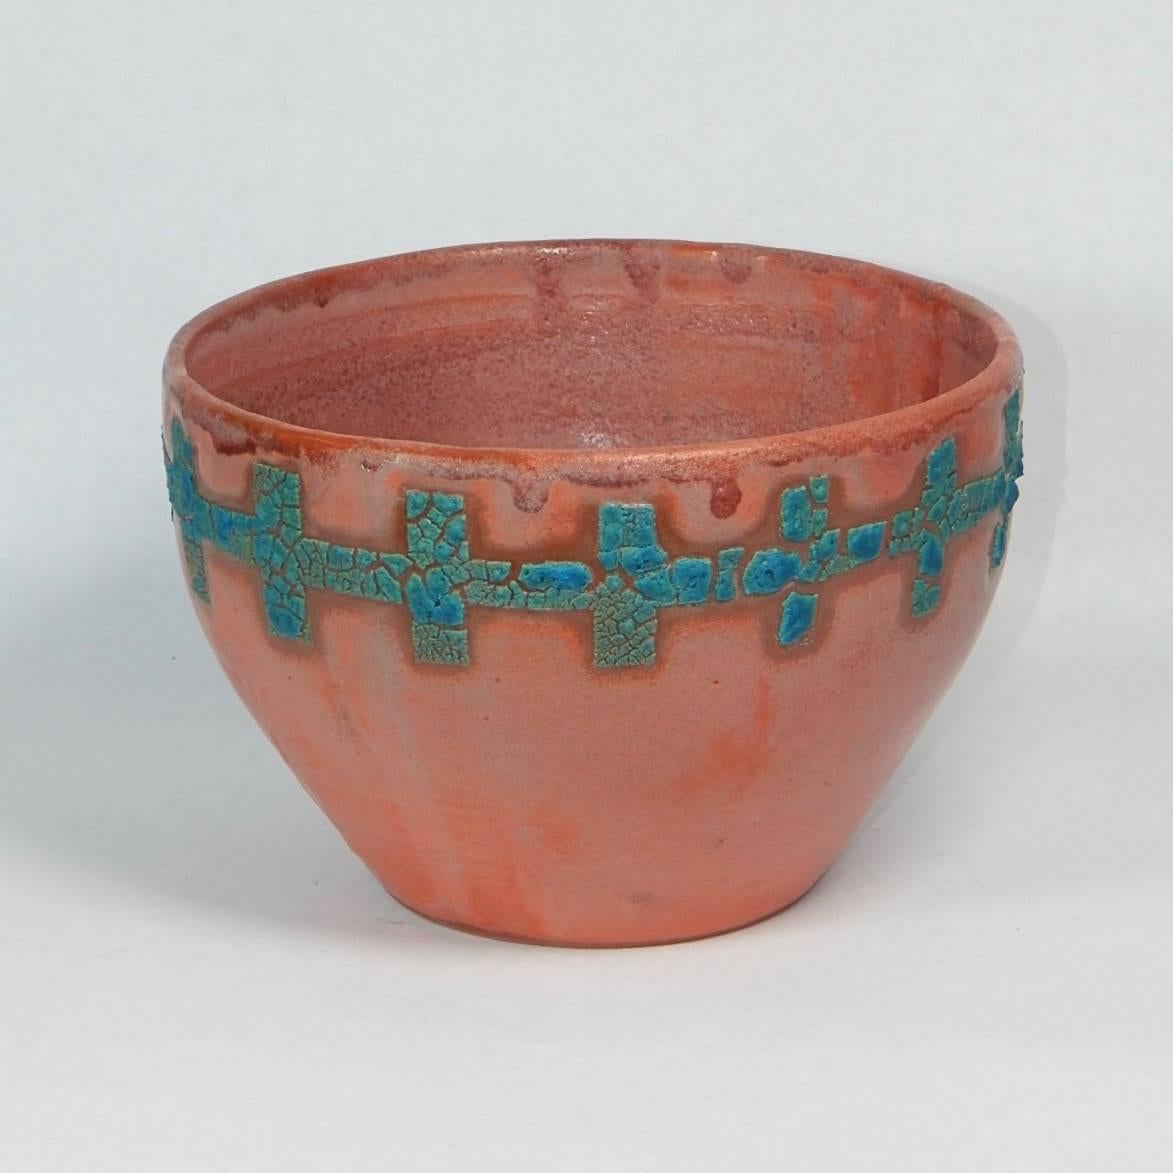  Relicware wheel thrown earthenware bowl by Andrew Wilder # 66. In terra cotta with turquoise lichen glaze and terra cotta colored overglaze . Made by hand in Los Angeles, California 2017.  We can produce commissions to order in this series. Contact